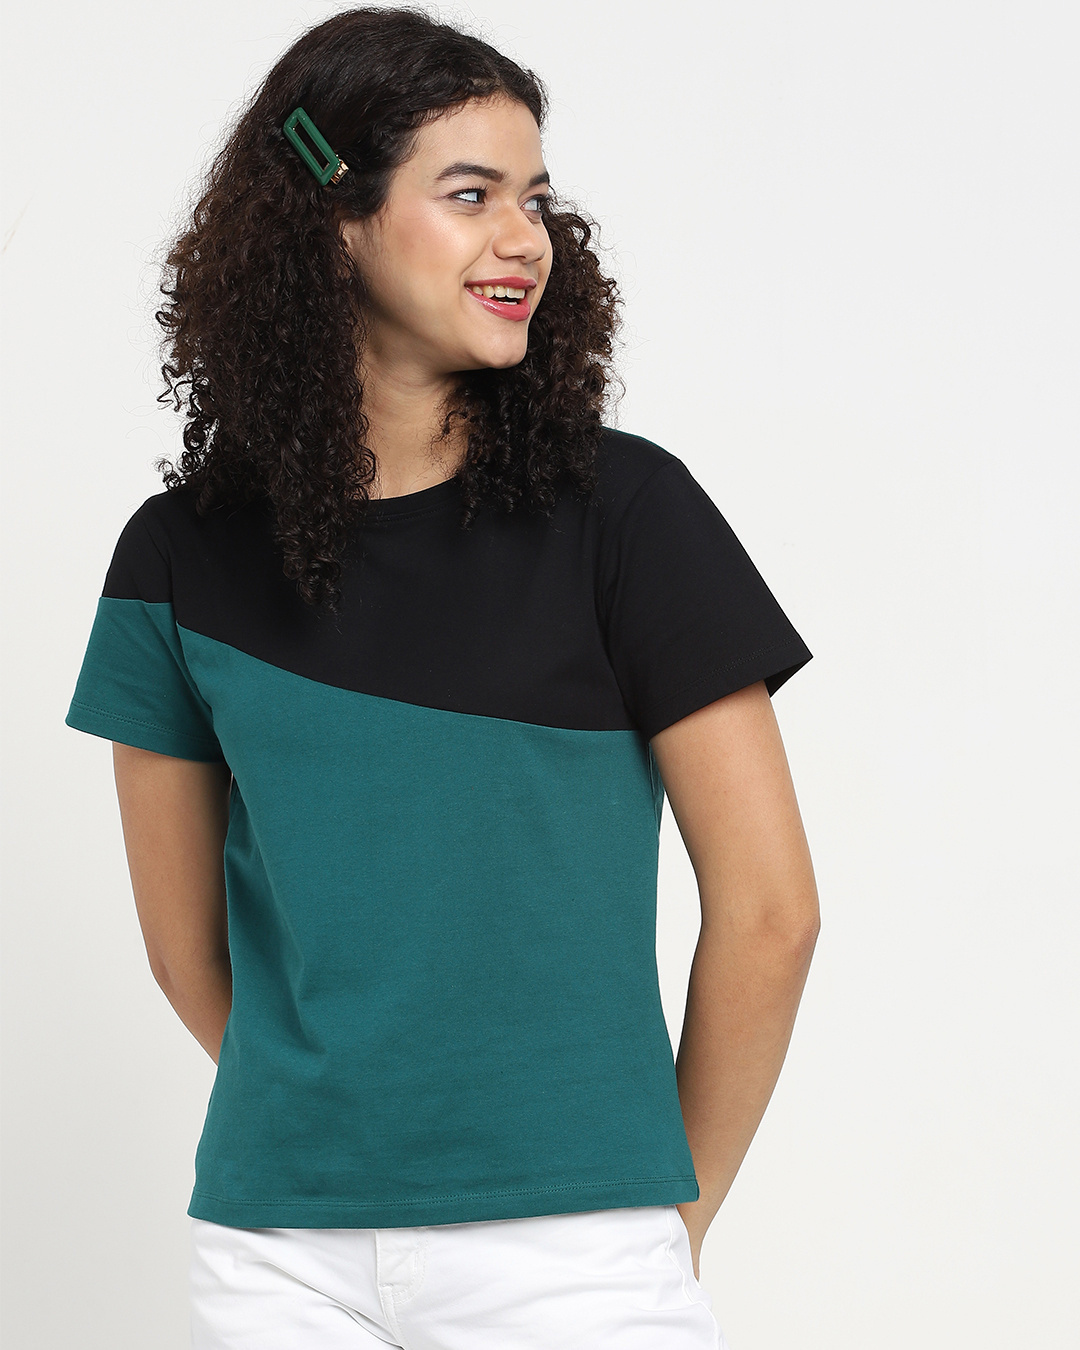 Shop Snazzy Green Color Block T-shirt For Women's-Back